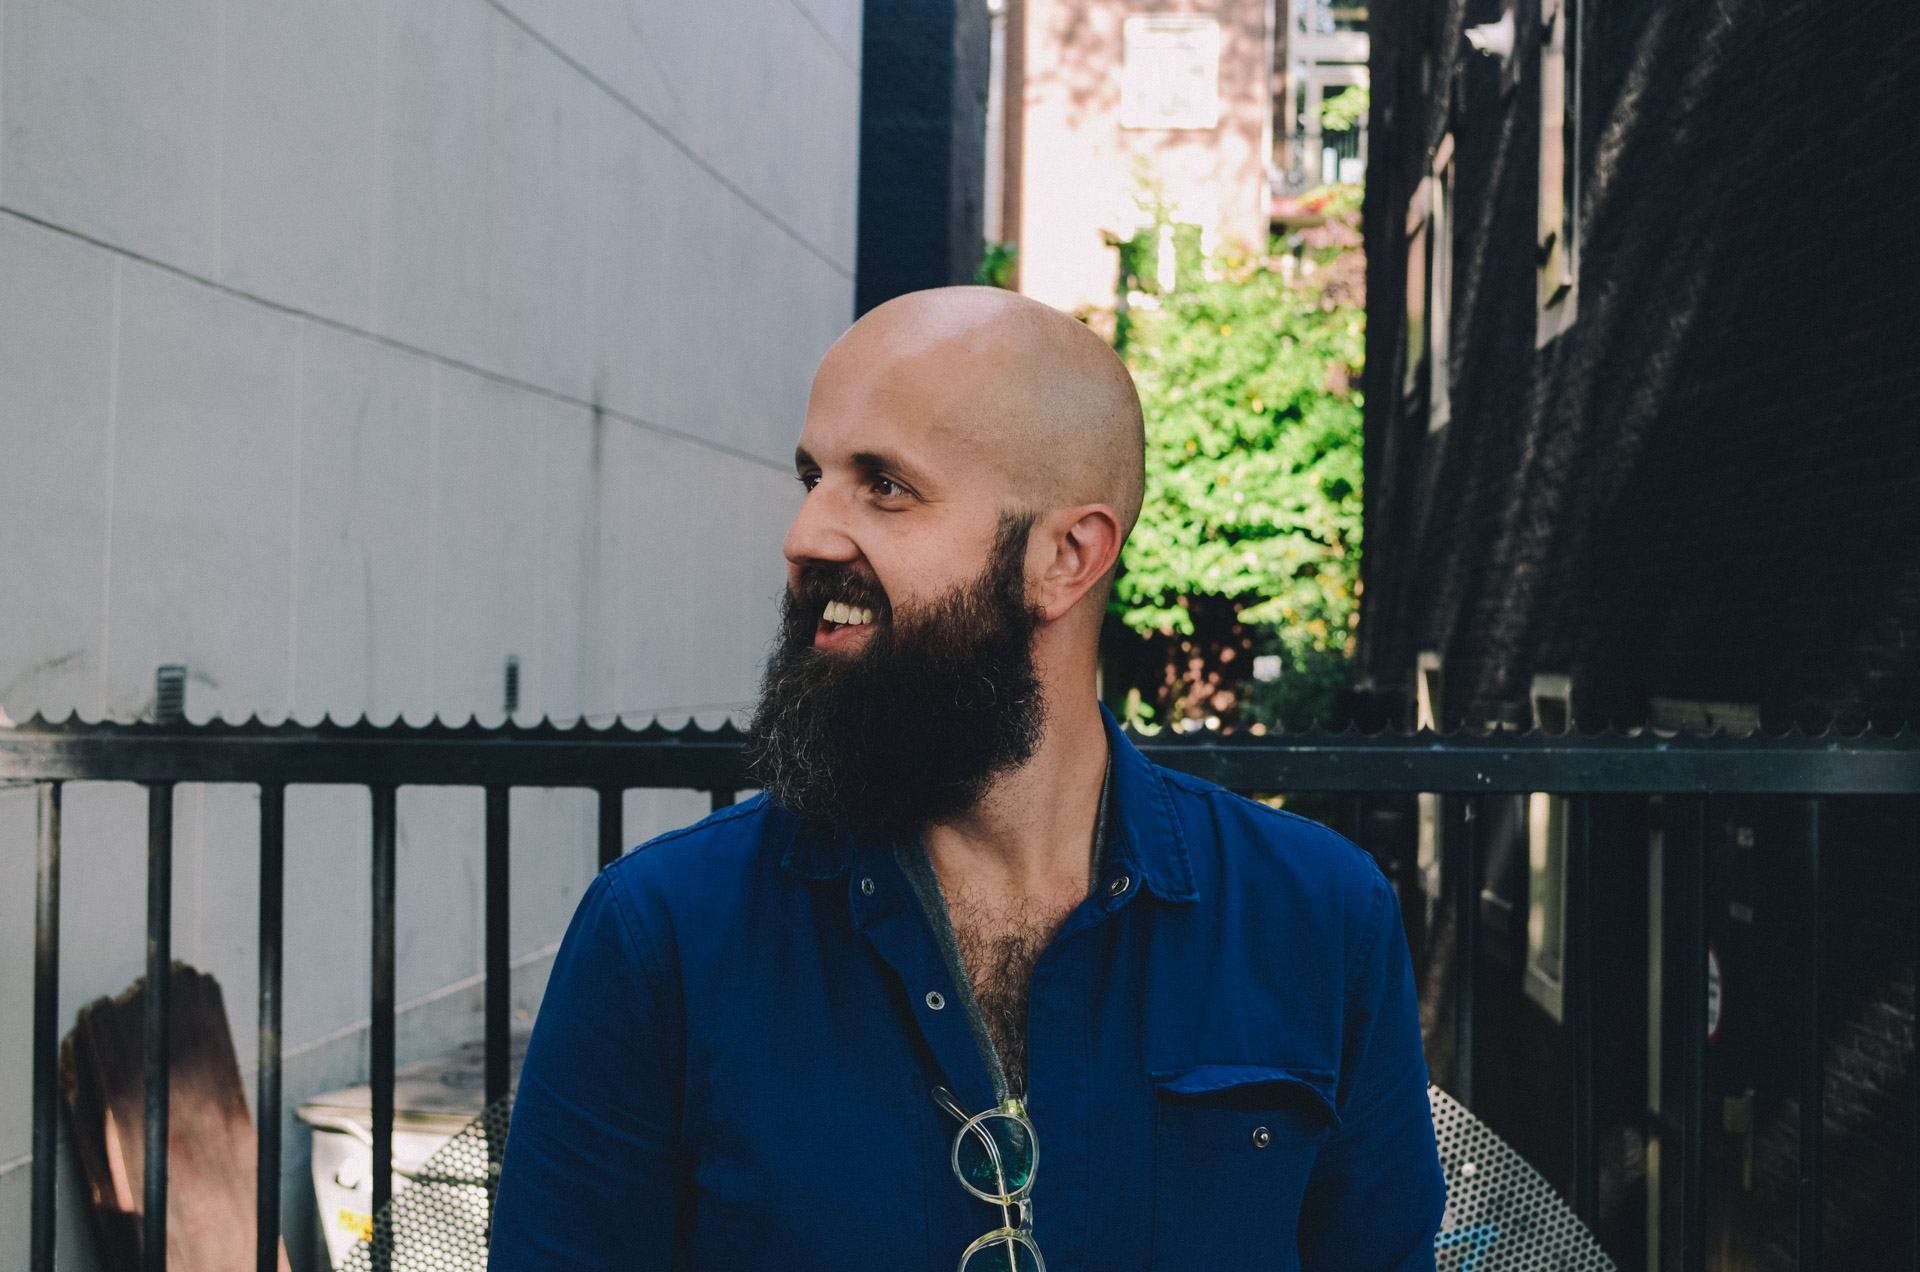 William Fitzsimmons Photo by Matthijs van der Ven for The Influences 0433